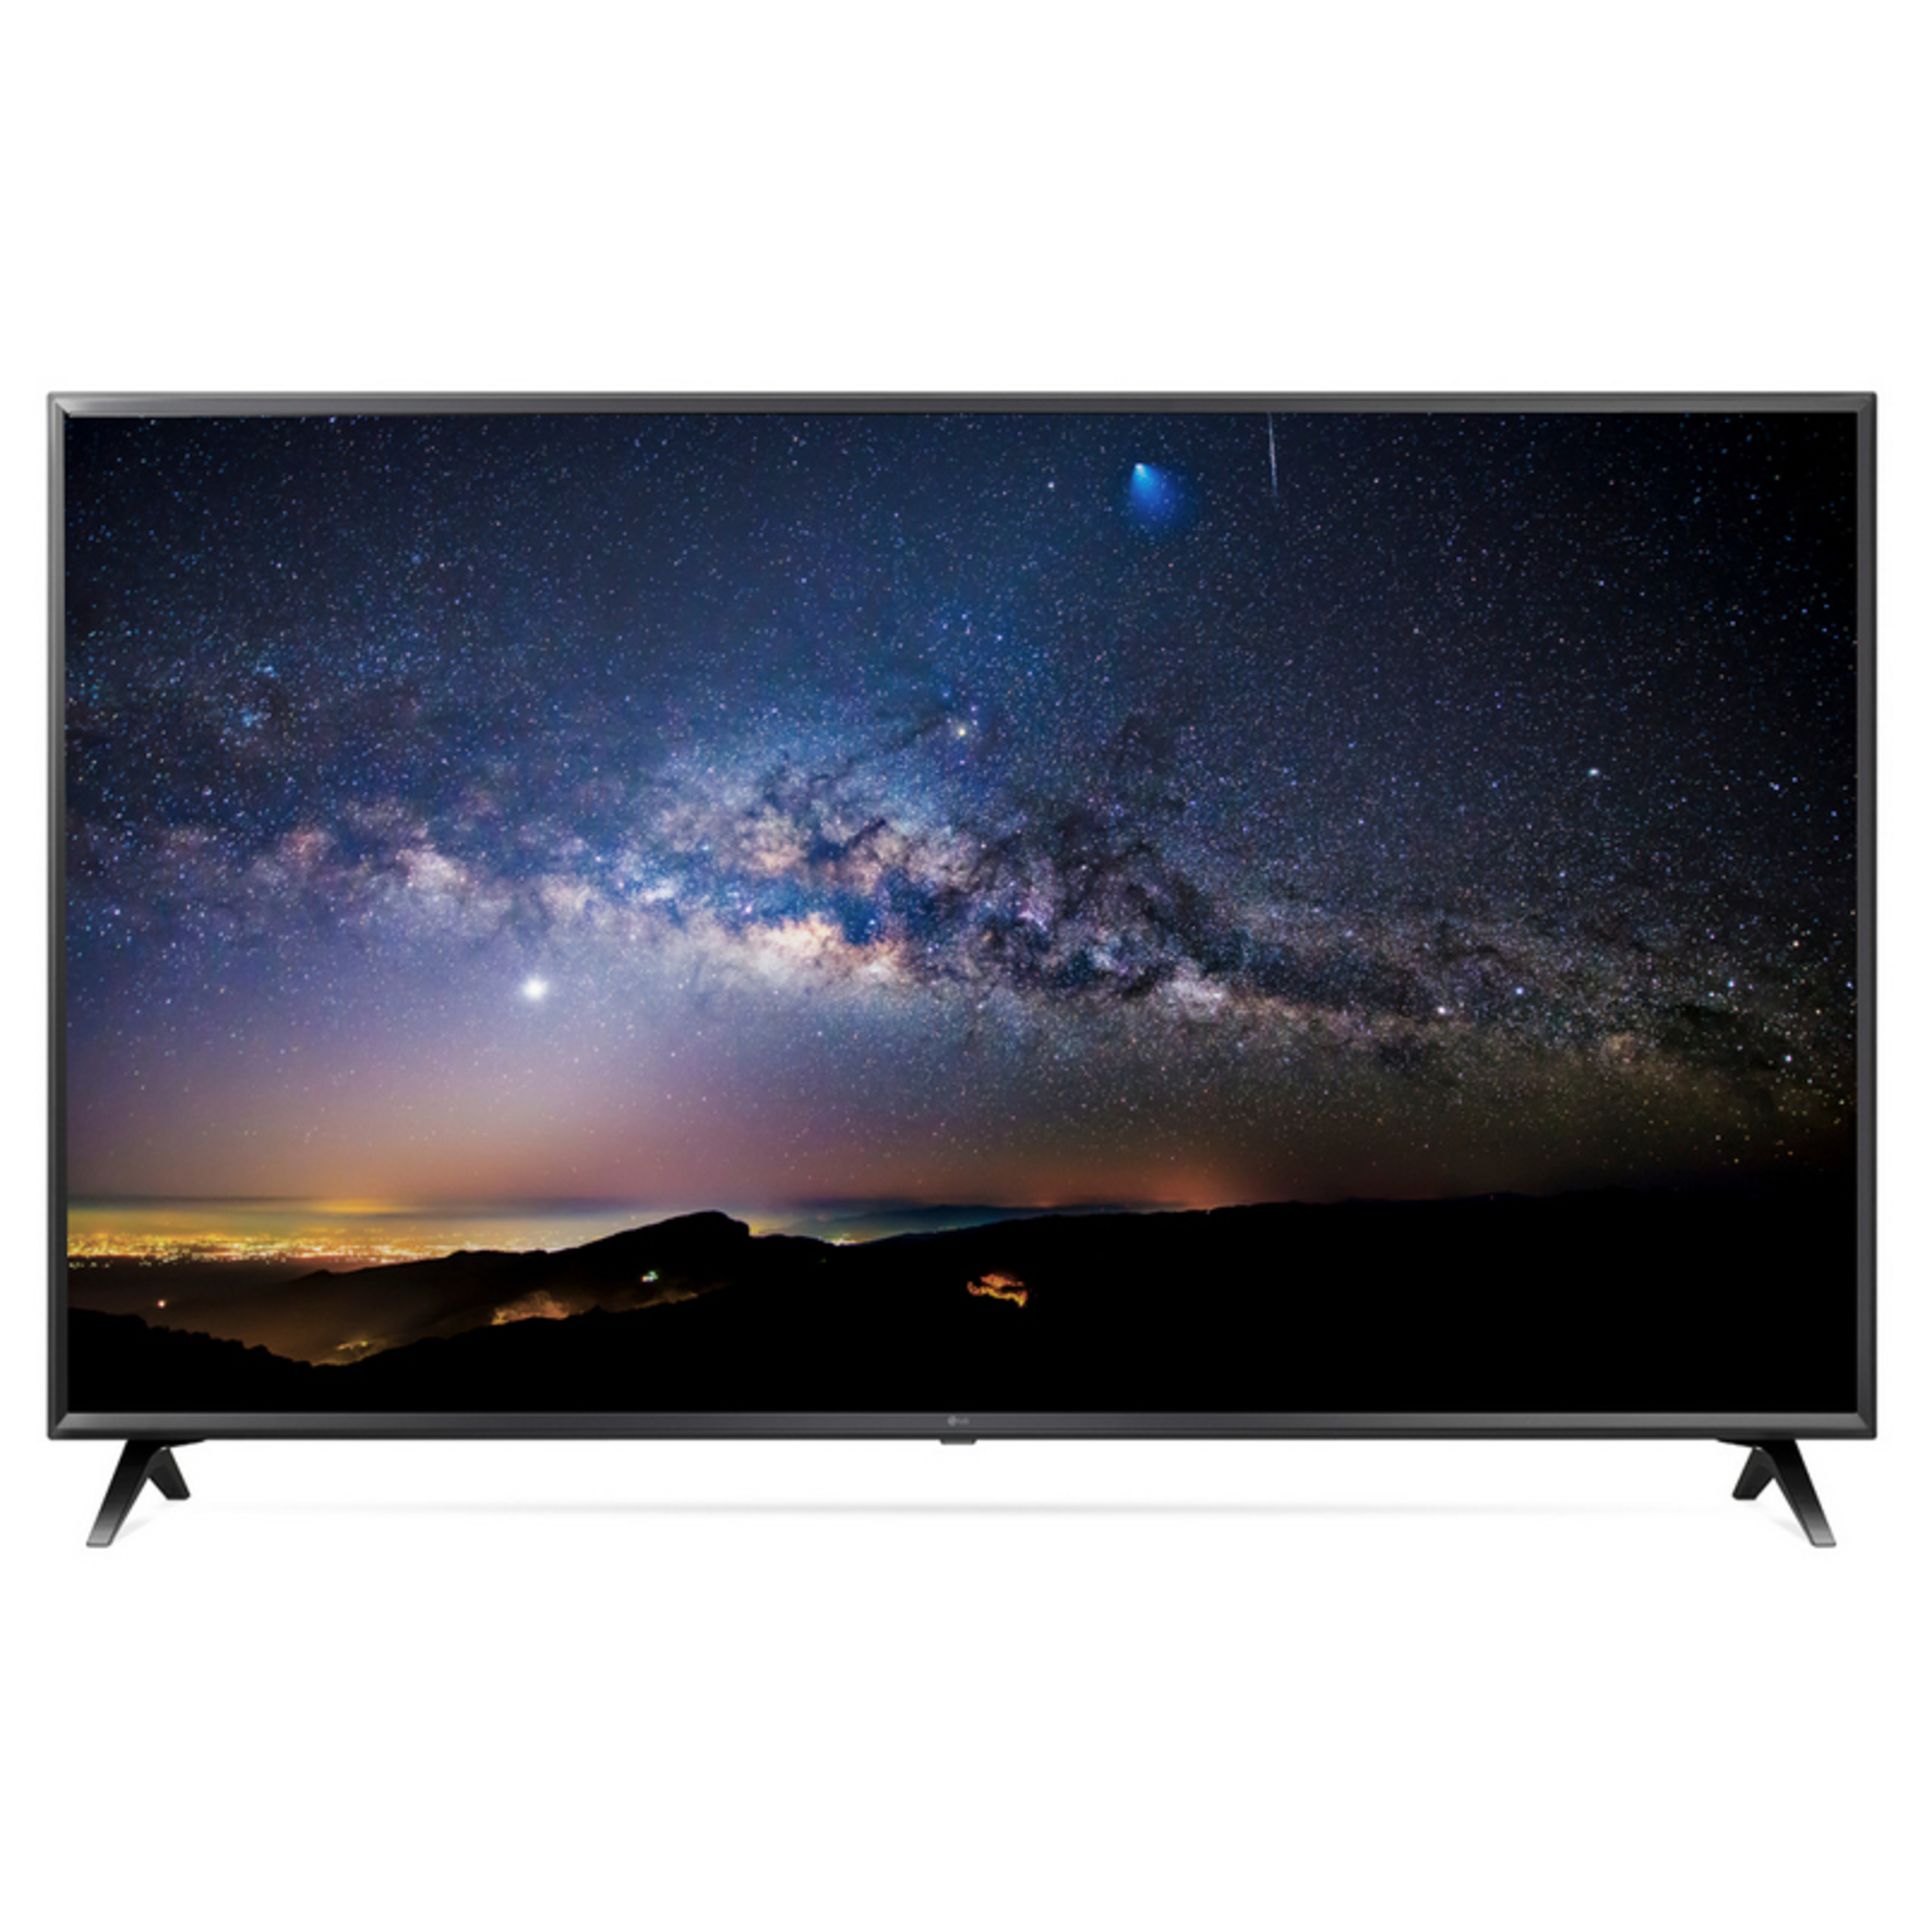 V Grade A LG 50 Inch ACTIVE HDR 4K ULTRA HD LED SMART TV WITH FREEVIEW HD & WEBOS 4.0 & WIFI - AI